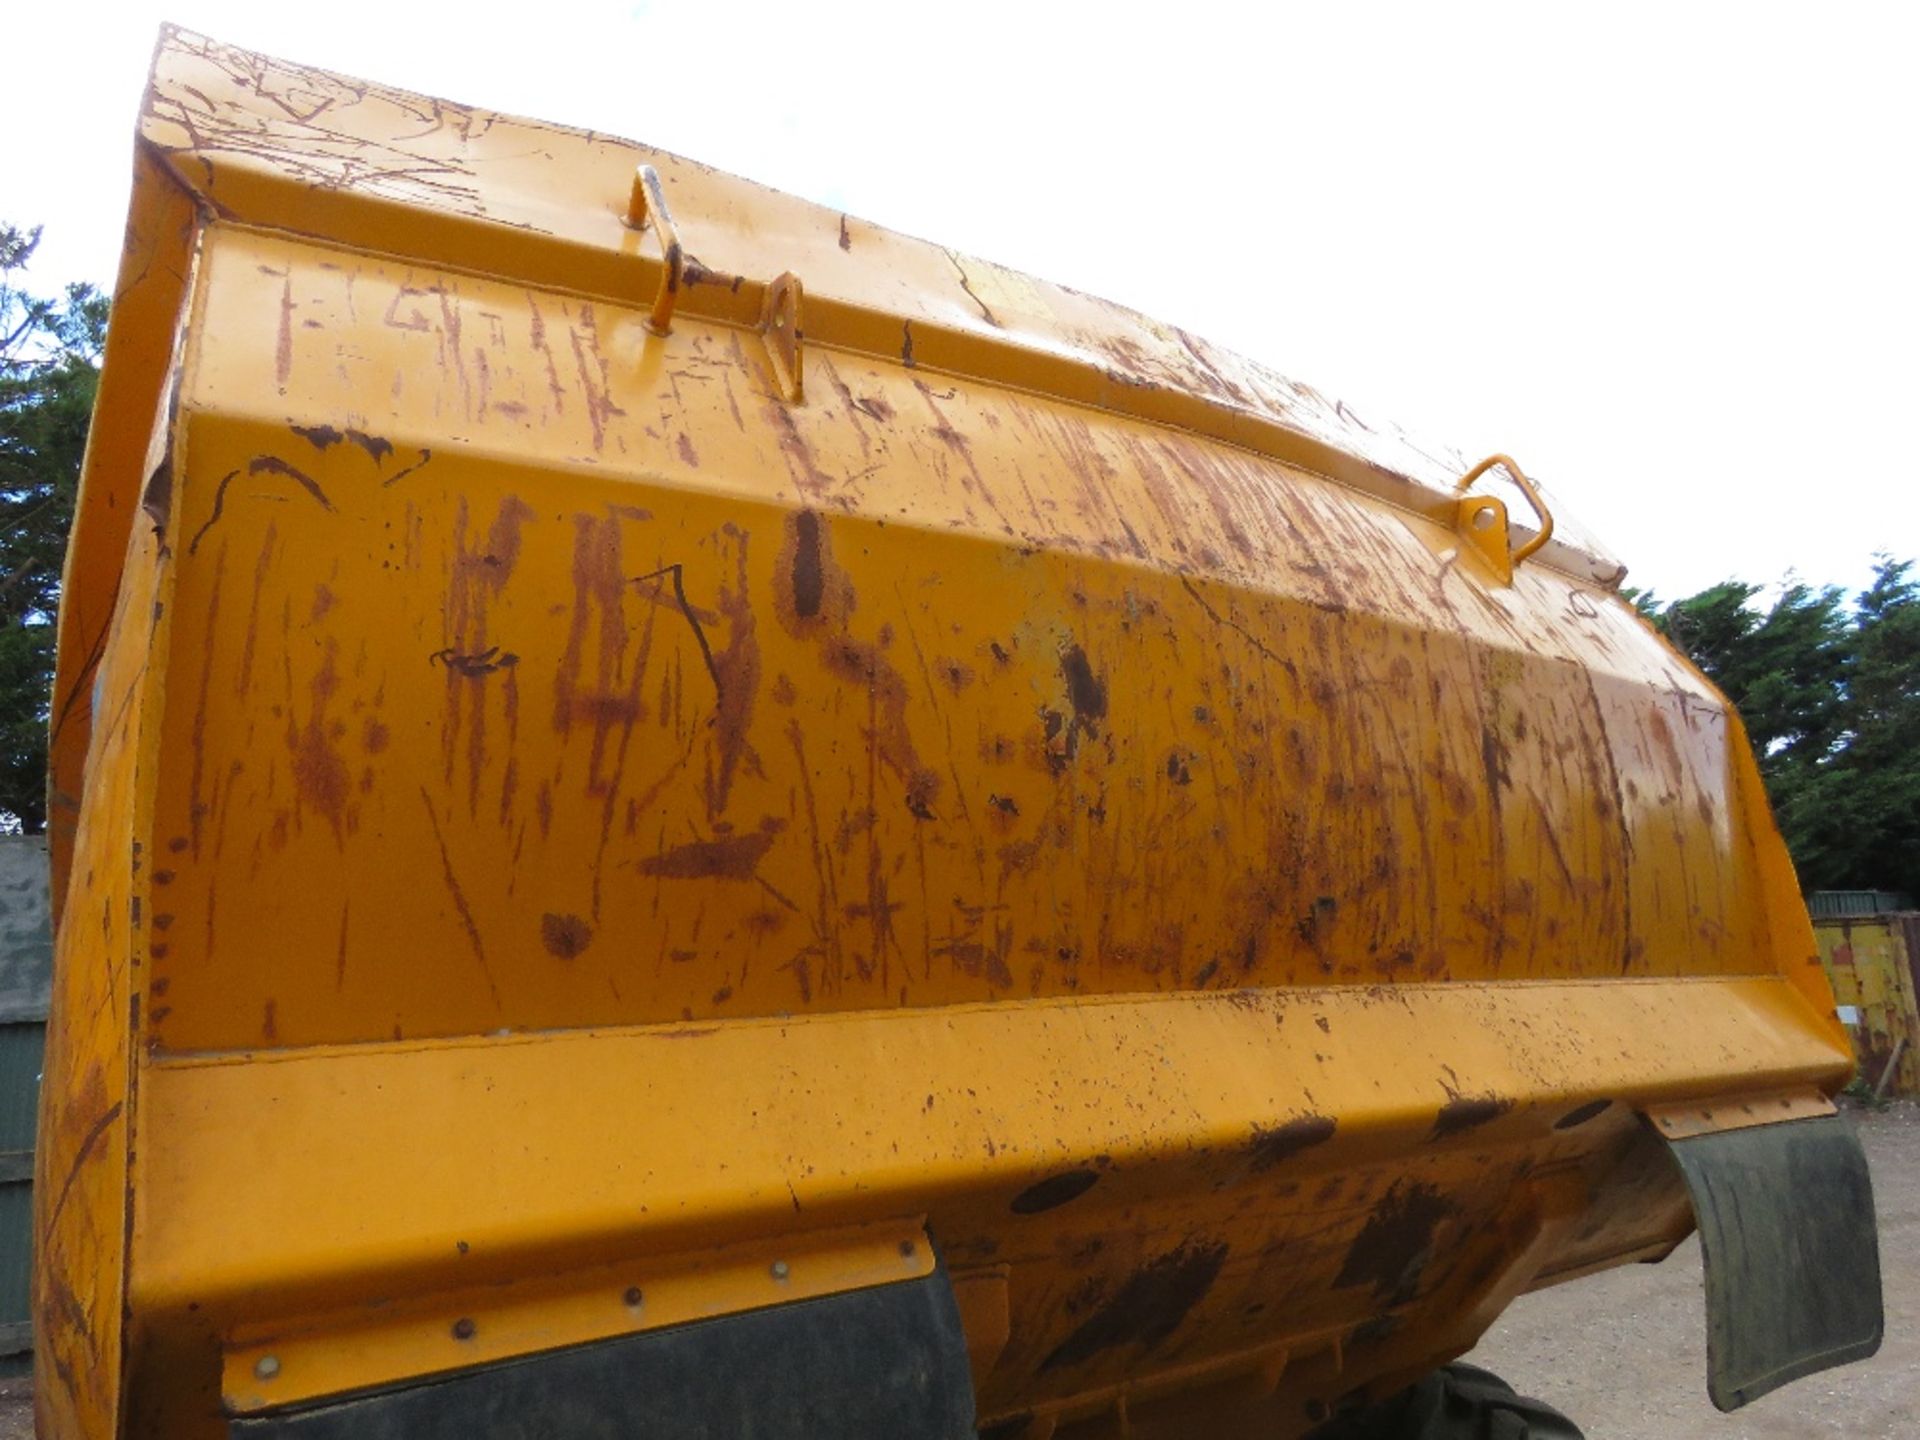 TEREX TA10 SITE DUMPER, 10 TONNE CAPACITY, YEAR 2008 BUILD. 4028 REC HOURS. PN:10D02. WHEN TESTED W - Image 13 of 15